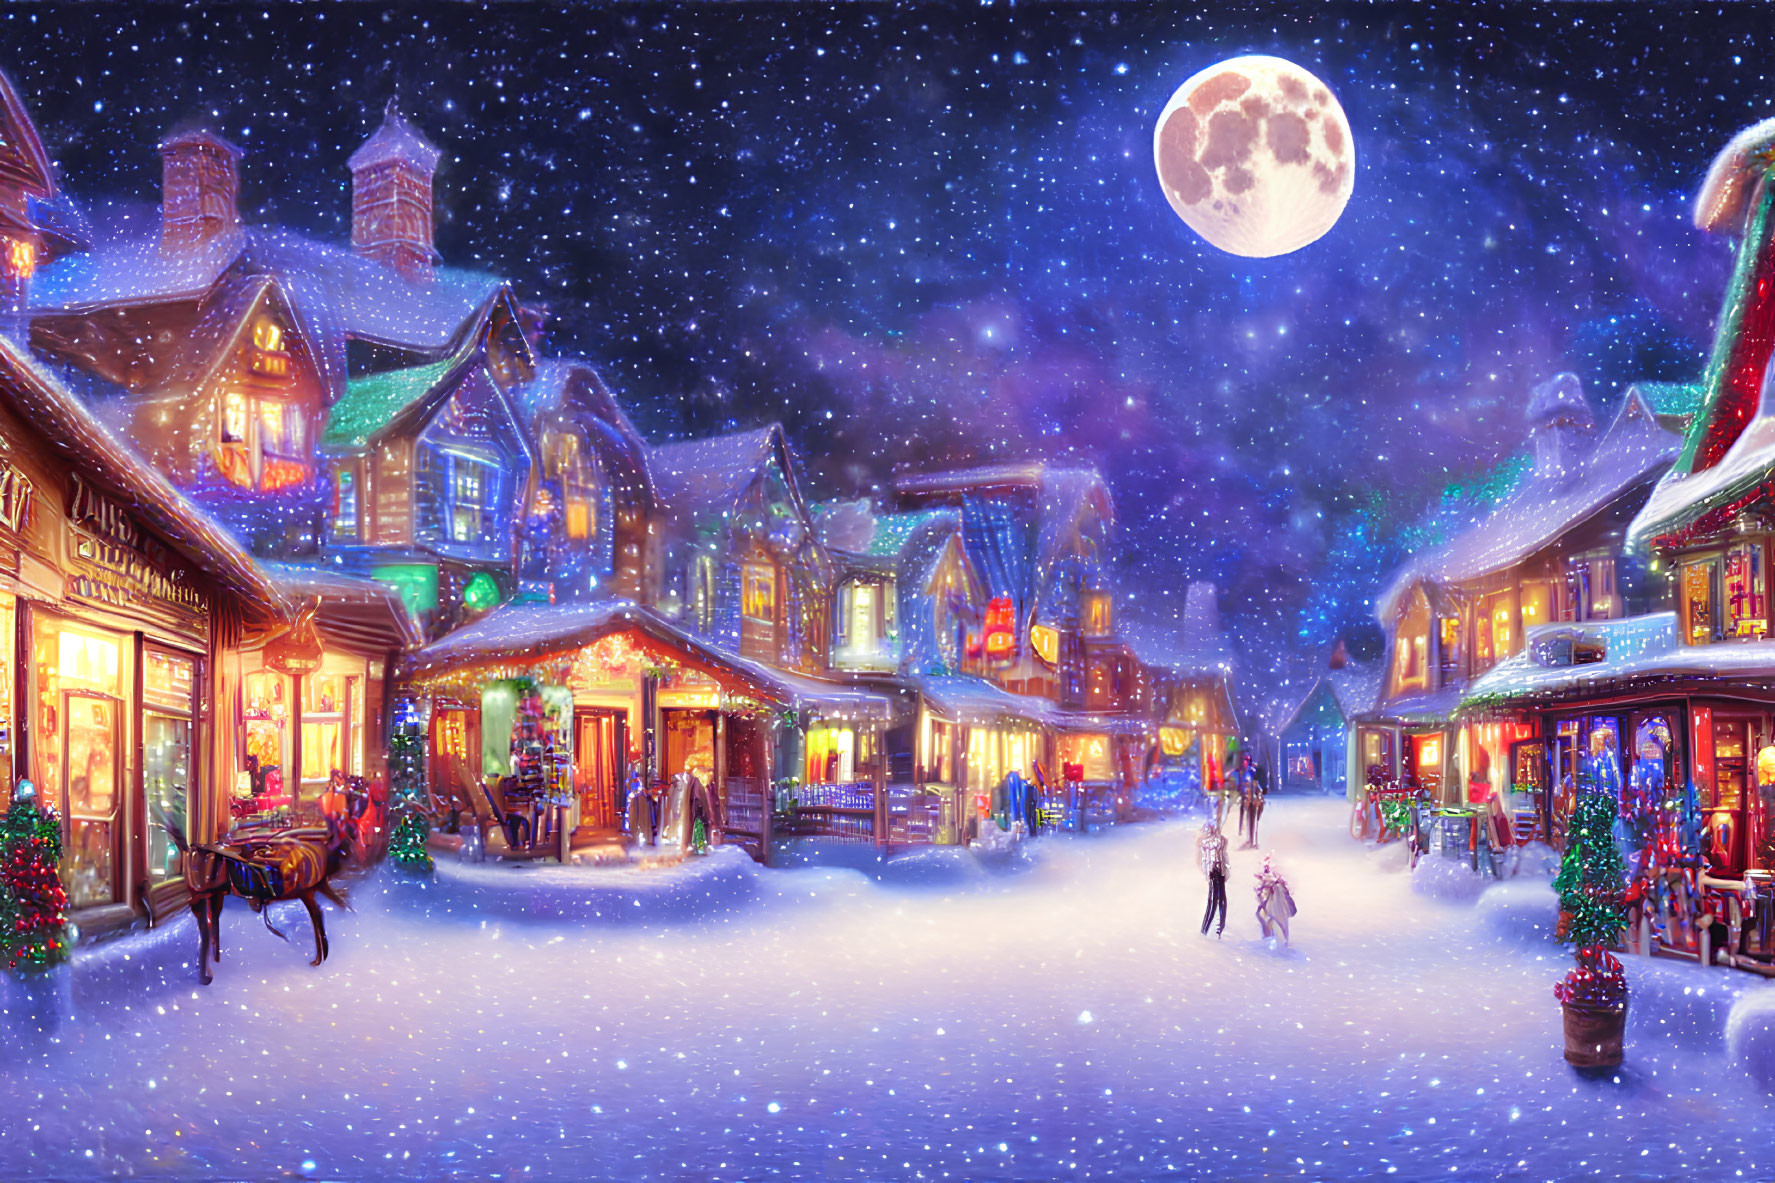 Snow-covered winter village scene with holiday decorations, horse-drawn carriage, and starry sky.